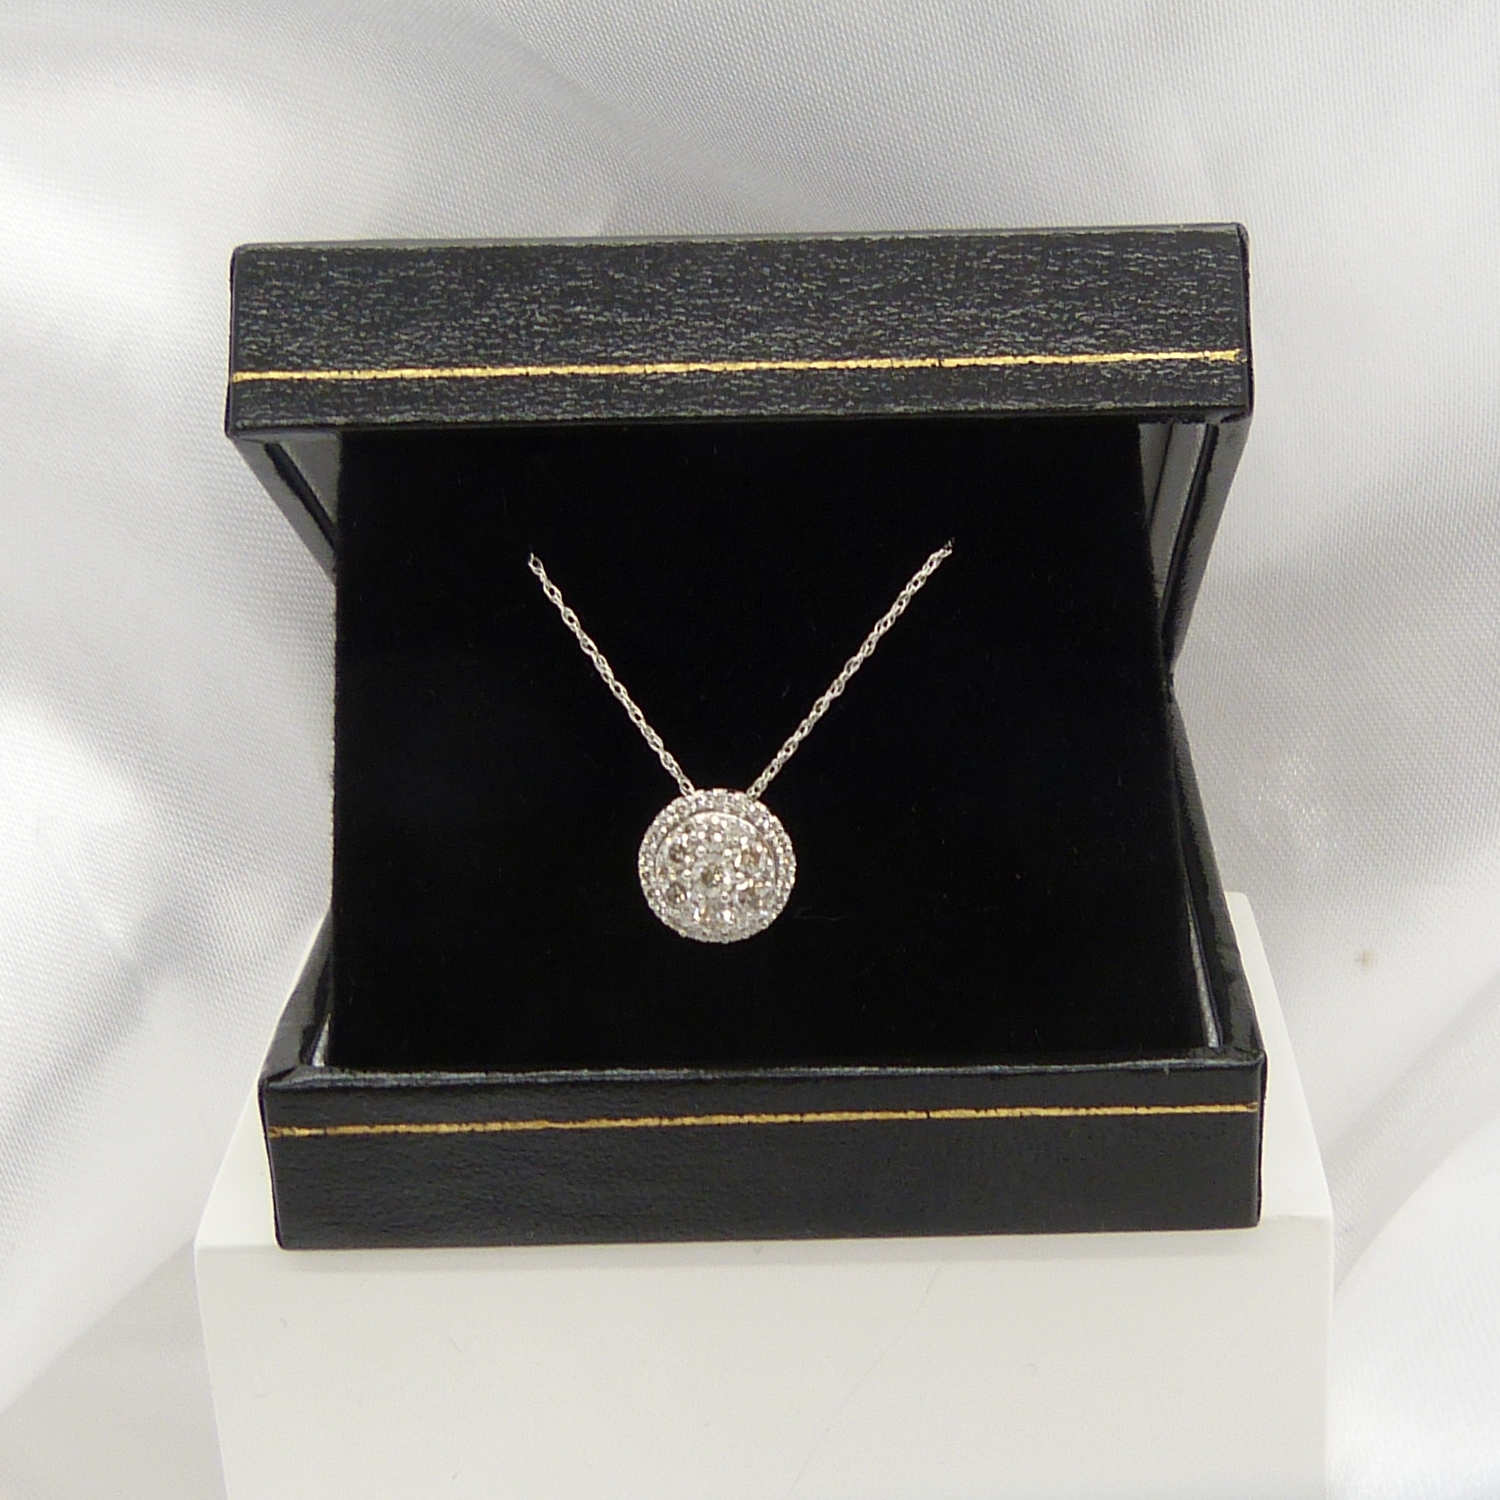 White Gold 0.50 Carat Diamond Cluster Necklace With Gift Box - Image 6 of 6